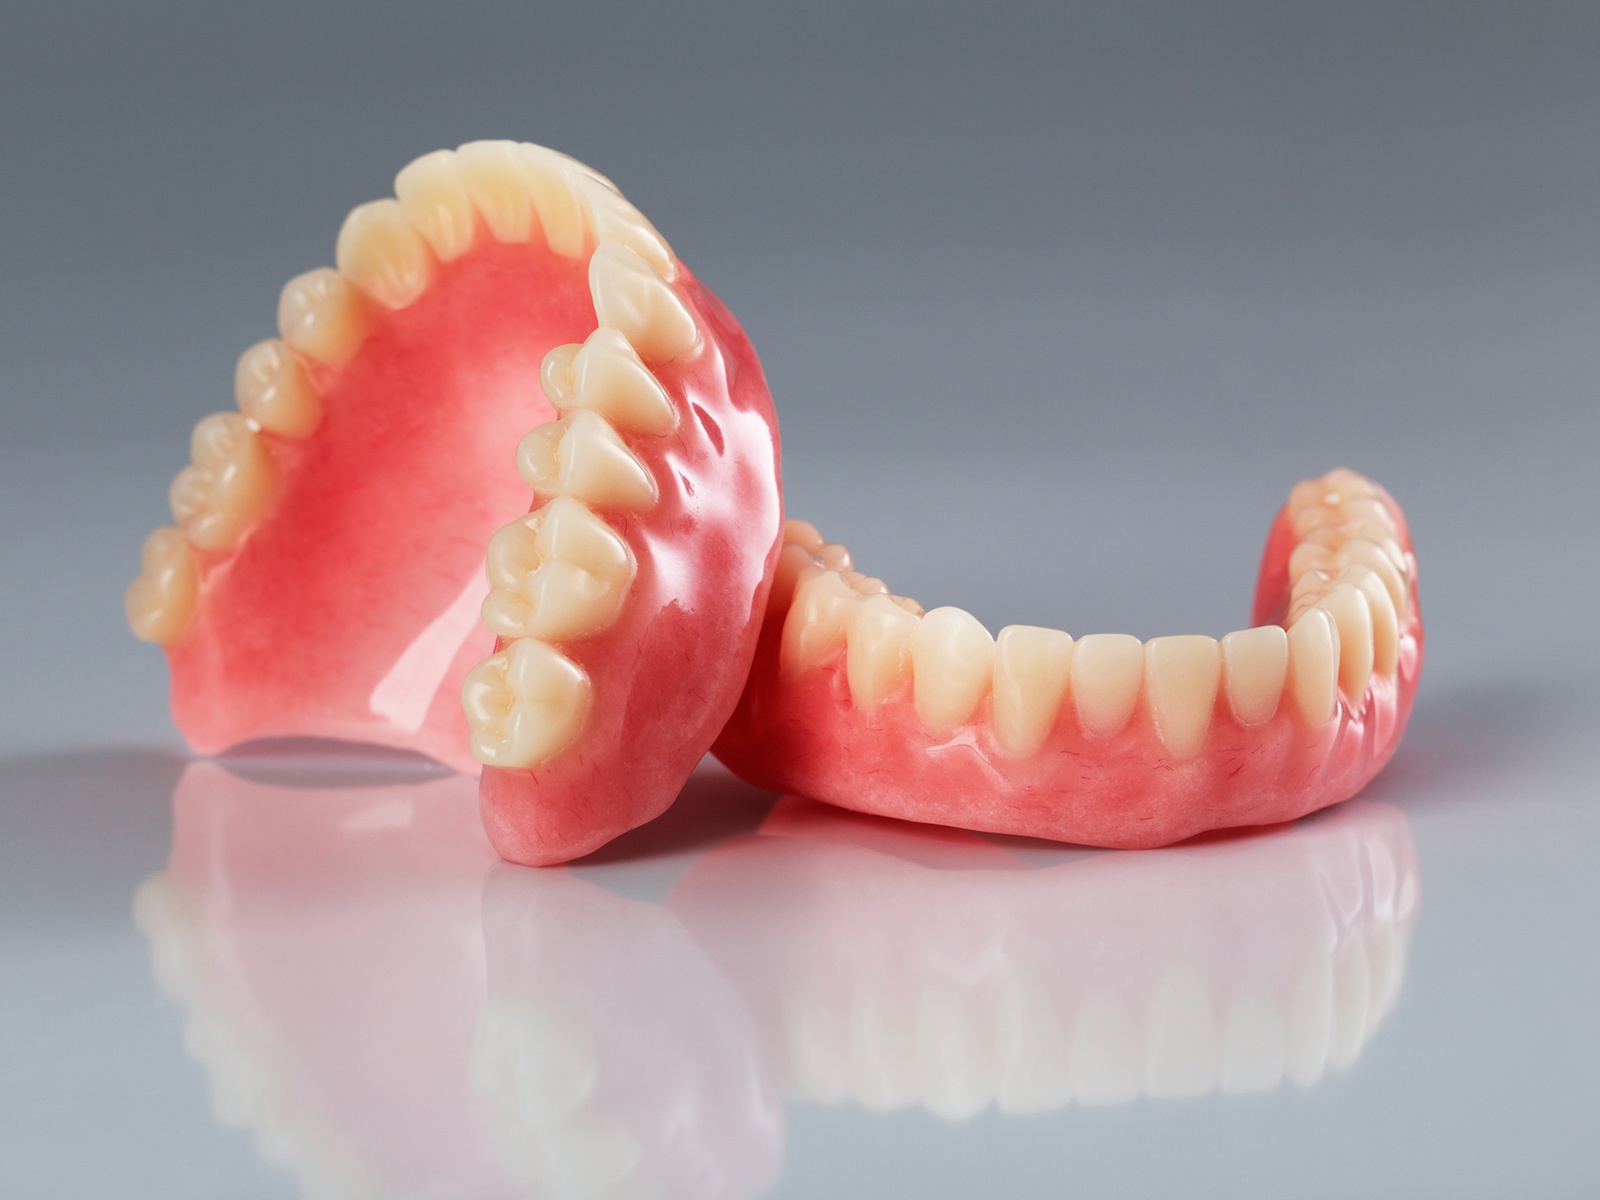 Are permanent dentures better than temporary?